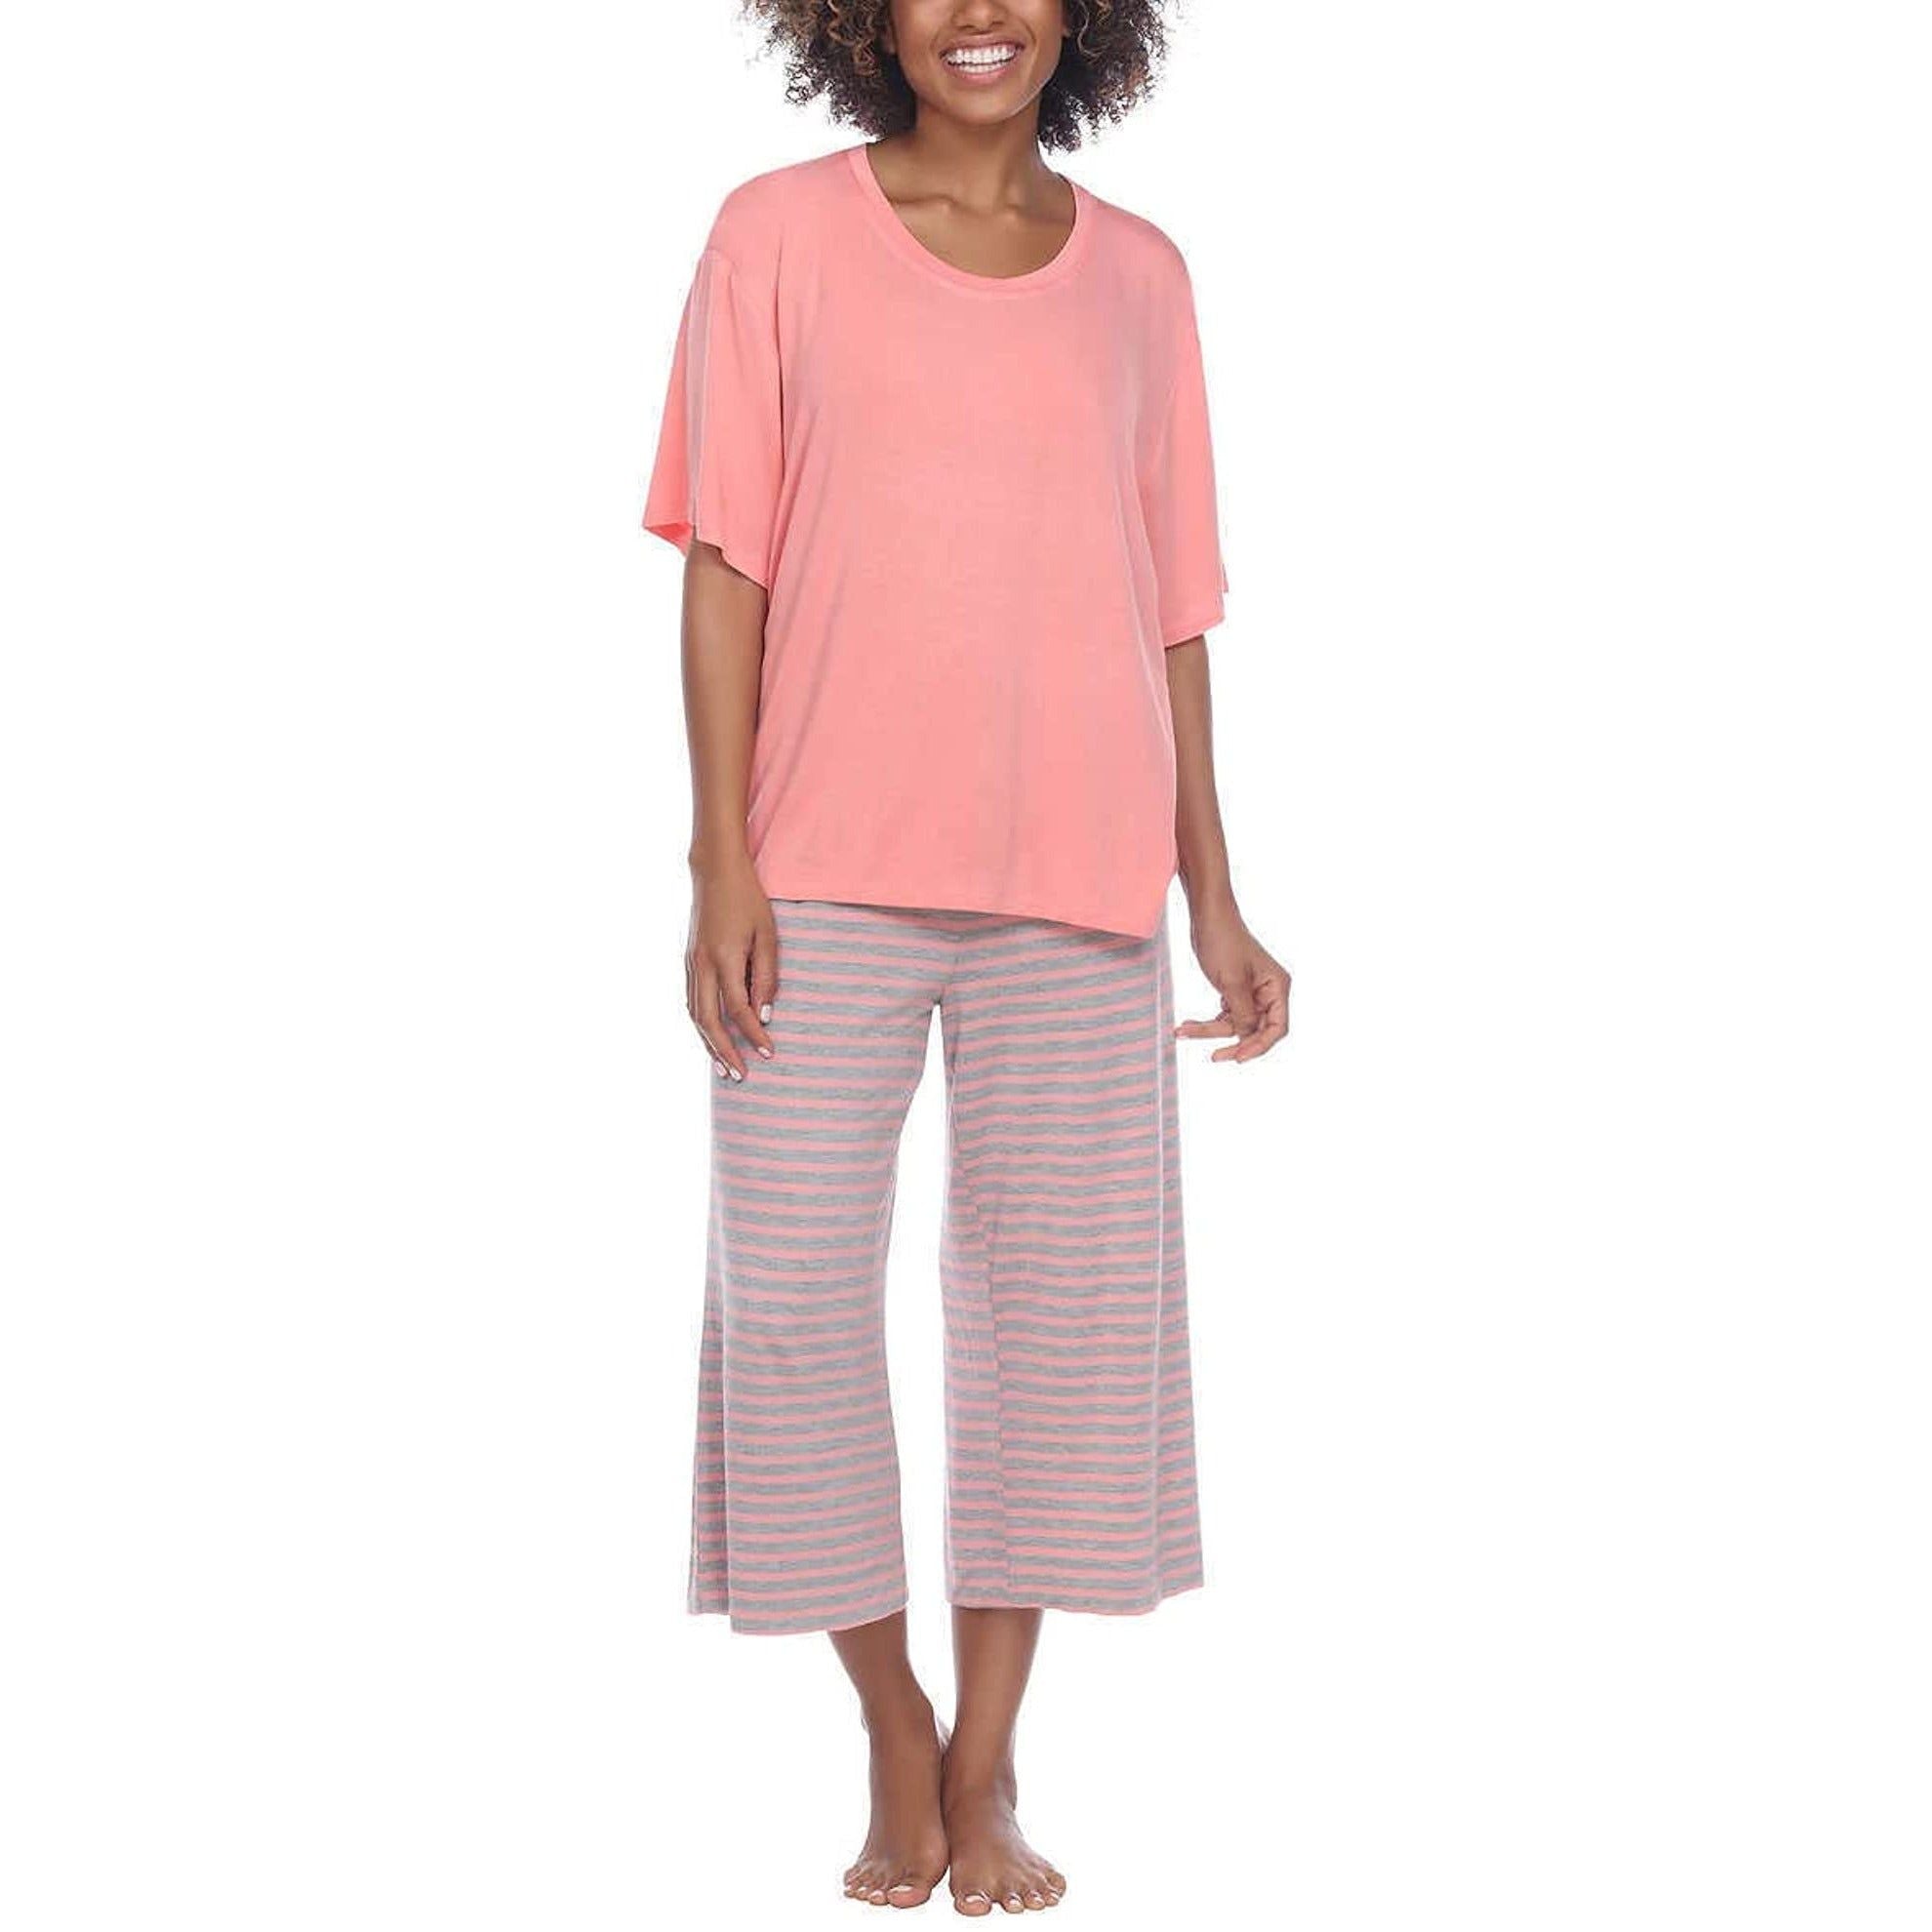 Cozy and chic Honeydew 3-piece pajama set: Long-sleeve top, shorts, and pants in soft, breathable fabric